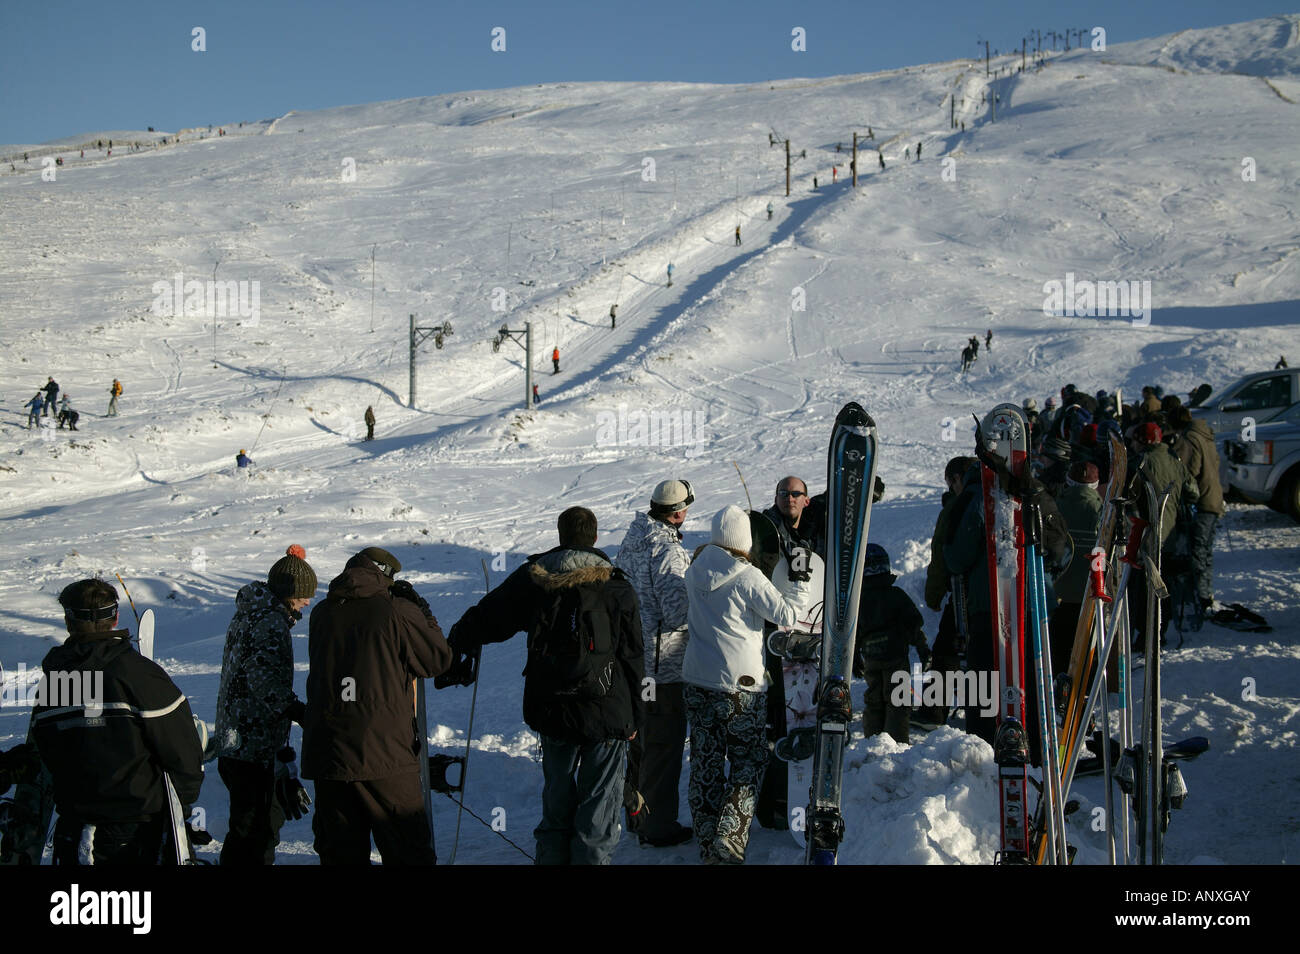 Skiers and snowboarders queuing for chairlift, Cairngorms National Park, Glenshee, Perthshire and Aberdeenshire, Scotland Stock Photo